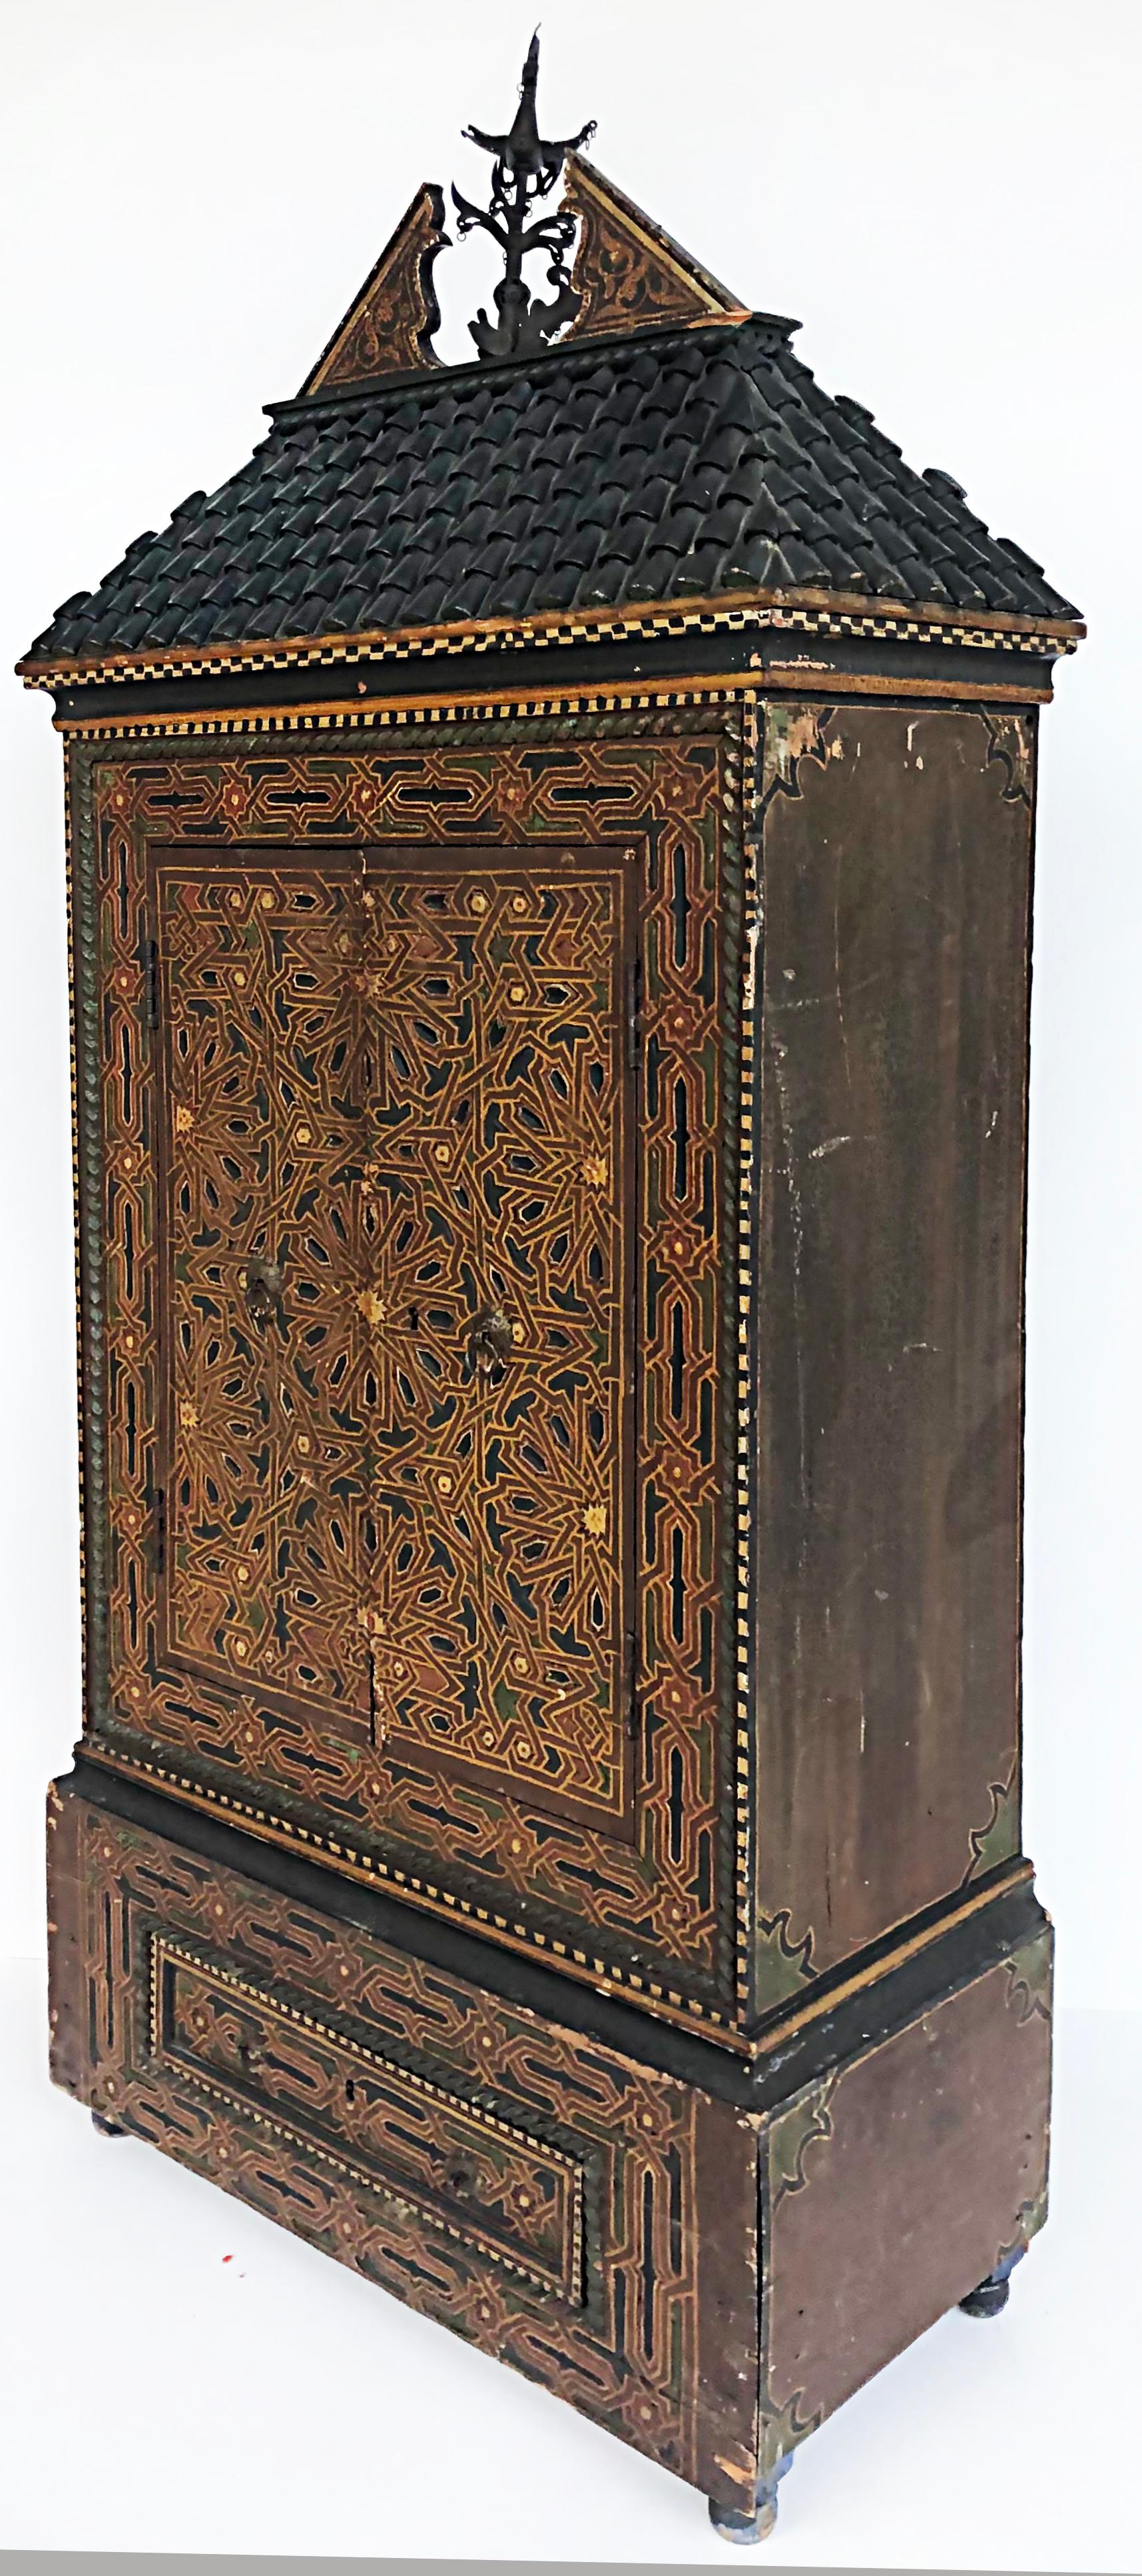 Eclectic Antique Asian polychrome wood cabinet, embellished roof

Offered for sale is an antique Asian polychrome-painted diminutive wood cabinet with a carved embellished rooftop adorned with a broken pediment and iron weathervane. Two carved